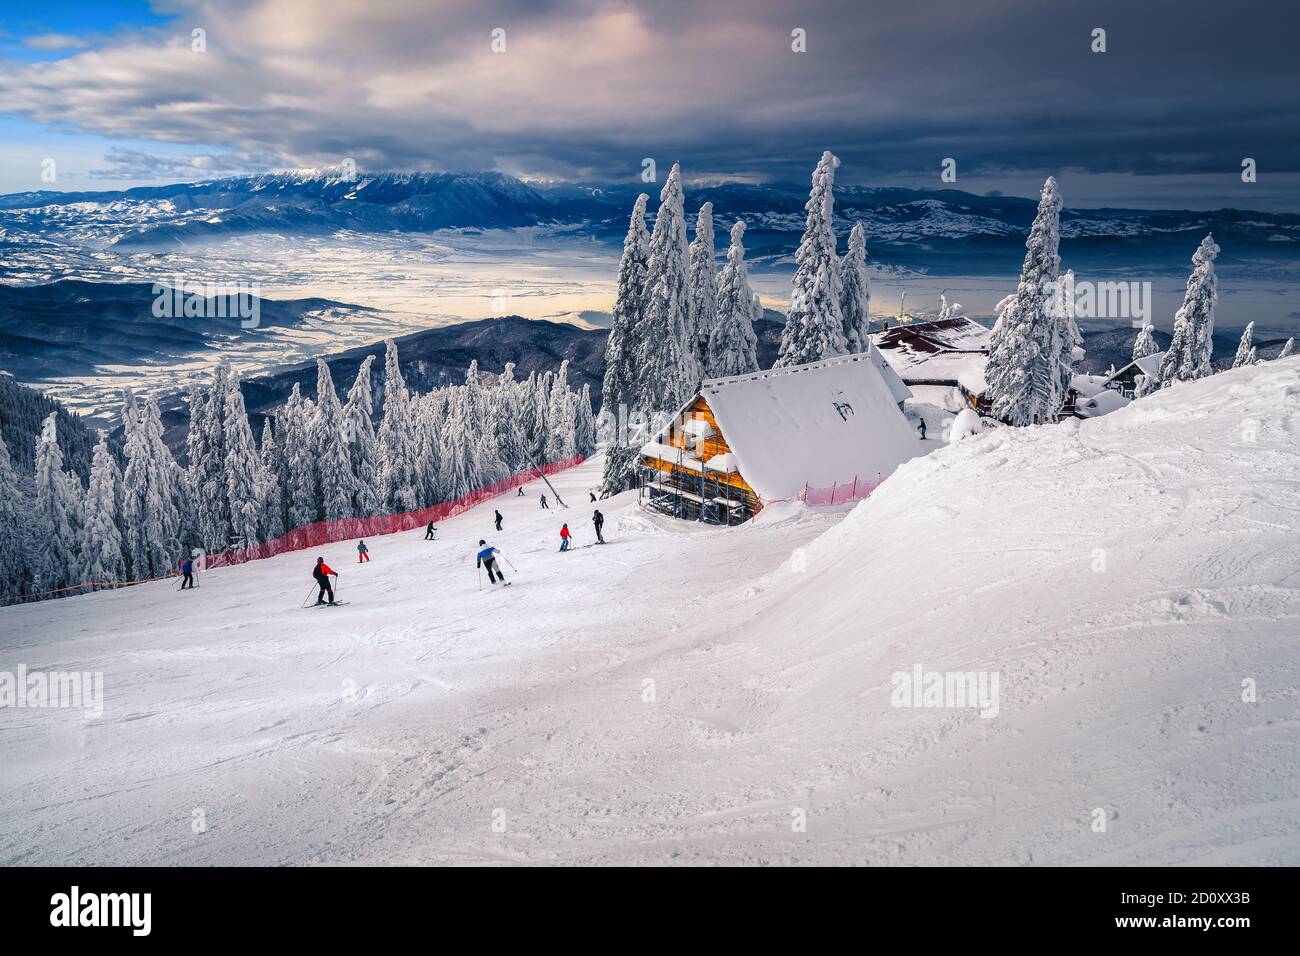 Amazing winter recreation places and ski slopes with snow covered trees. Active skiers on the slopes in Poiana Brasov ski resort, Transylvania, Romani Stock Photo